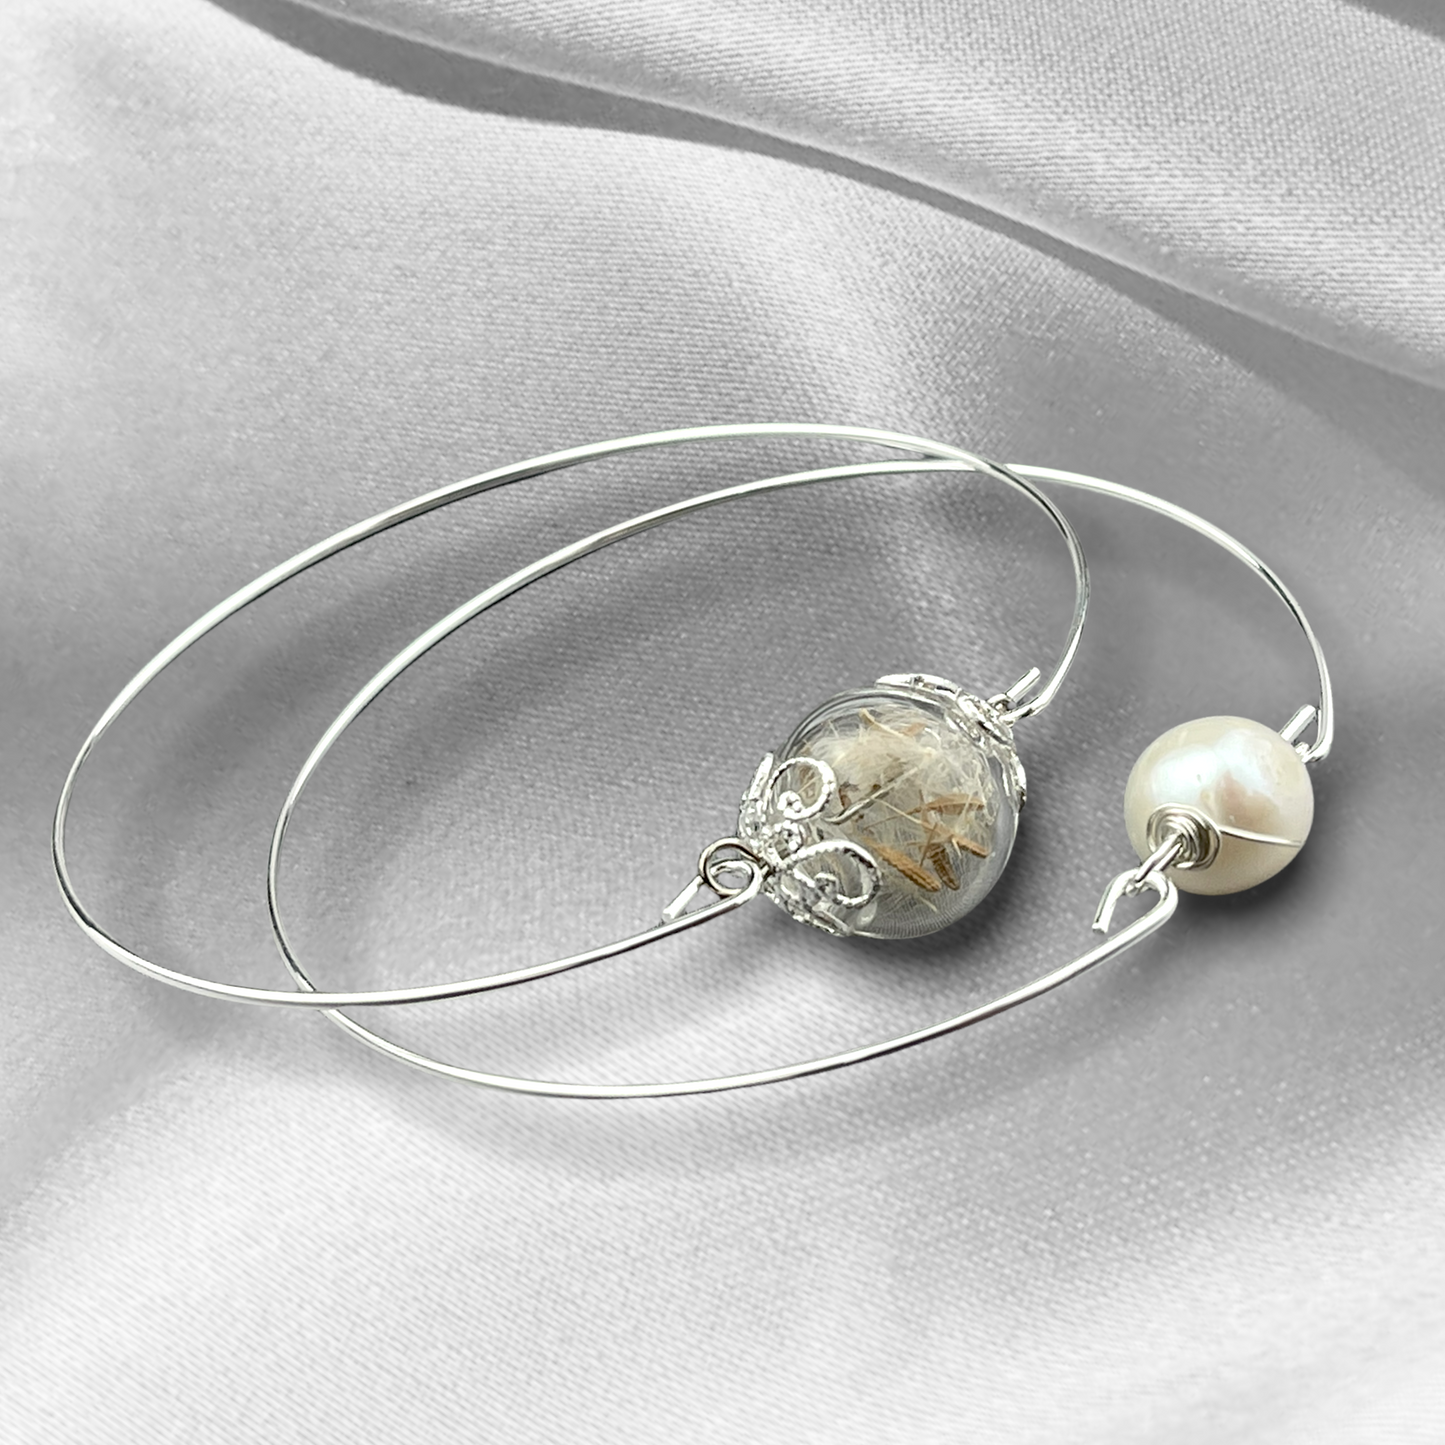 Bangles in the double pack real pulse flowers and freshwater pearl - Retremm 10